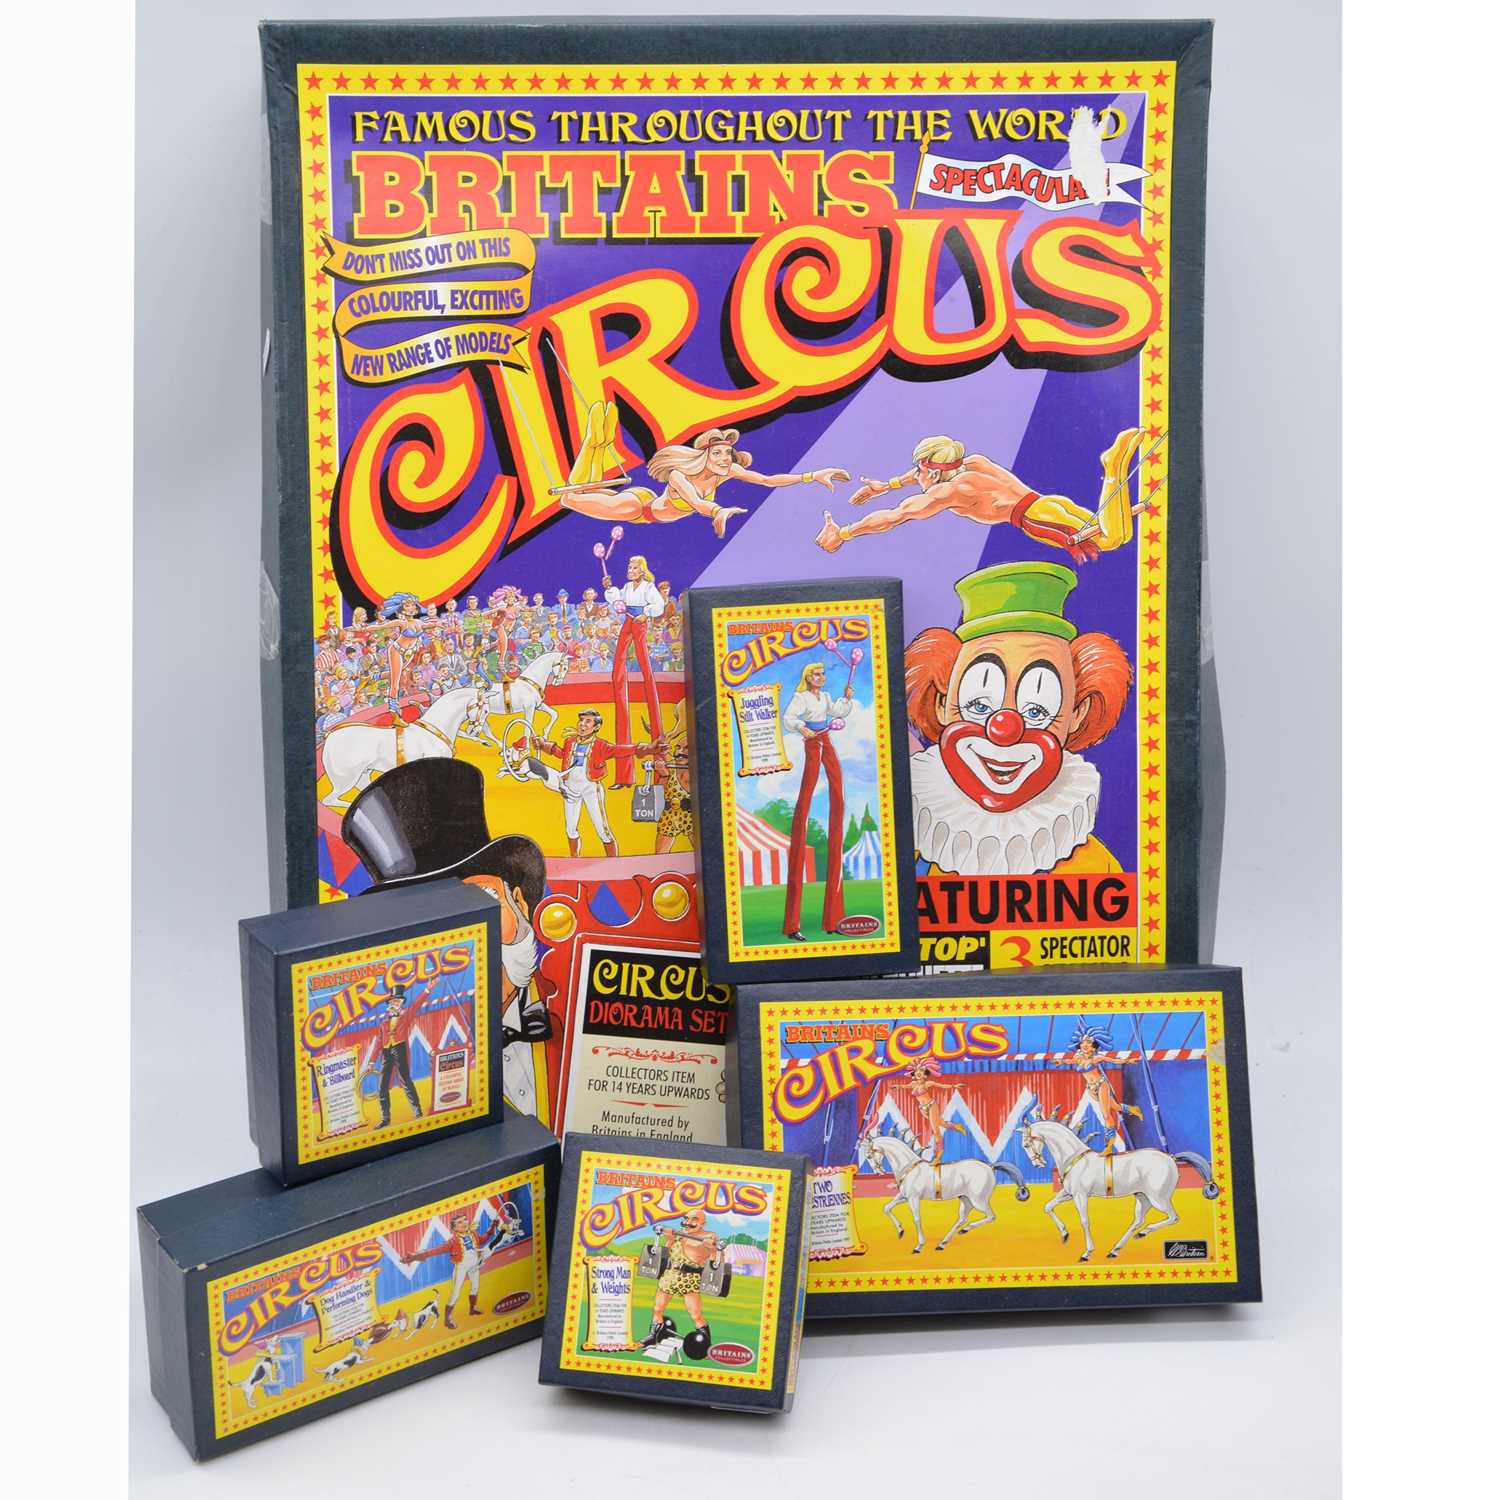 Lot 1060 - Britains figures ref 08665 Circus Diorama Set and other figure sets.